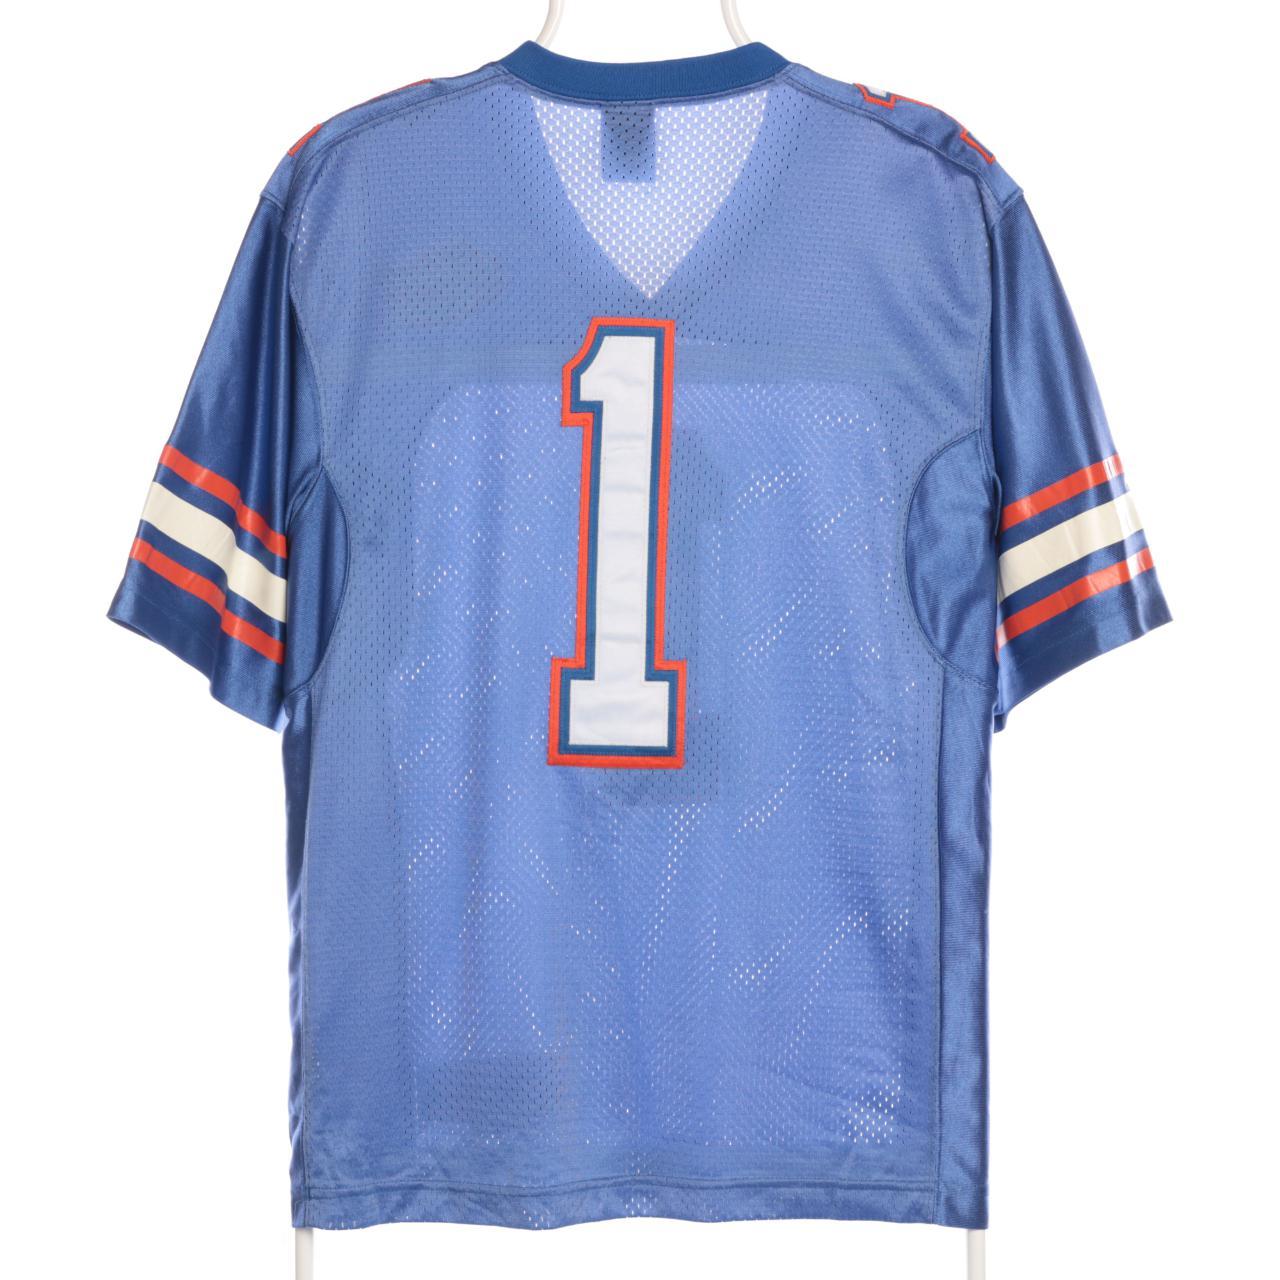 Product Image 2 - Vintage Nike Jersey

Nike 90's Jersey
Embroidered